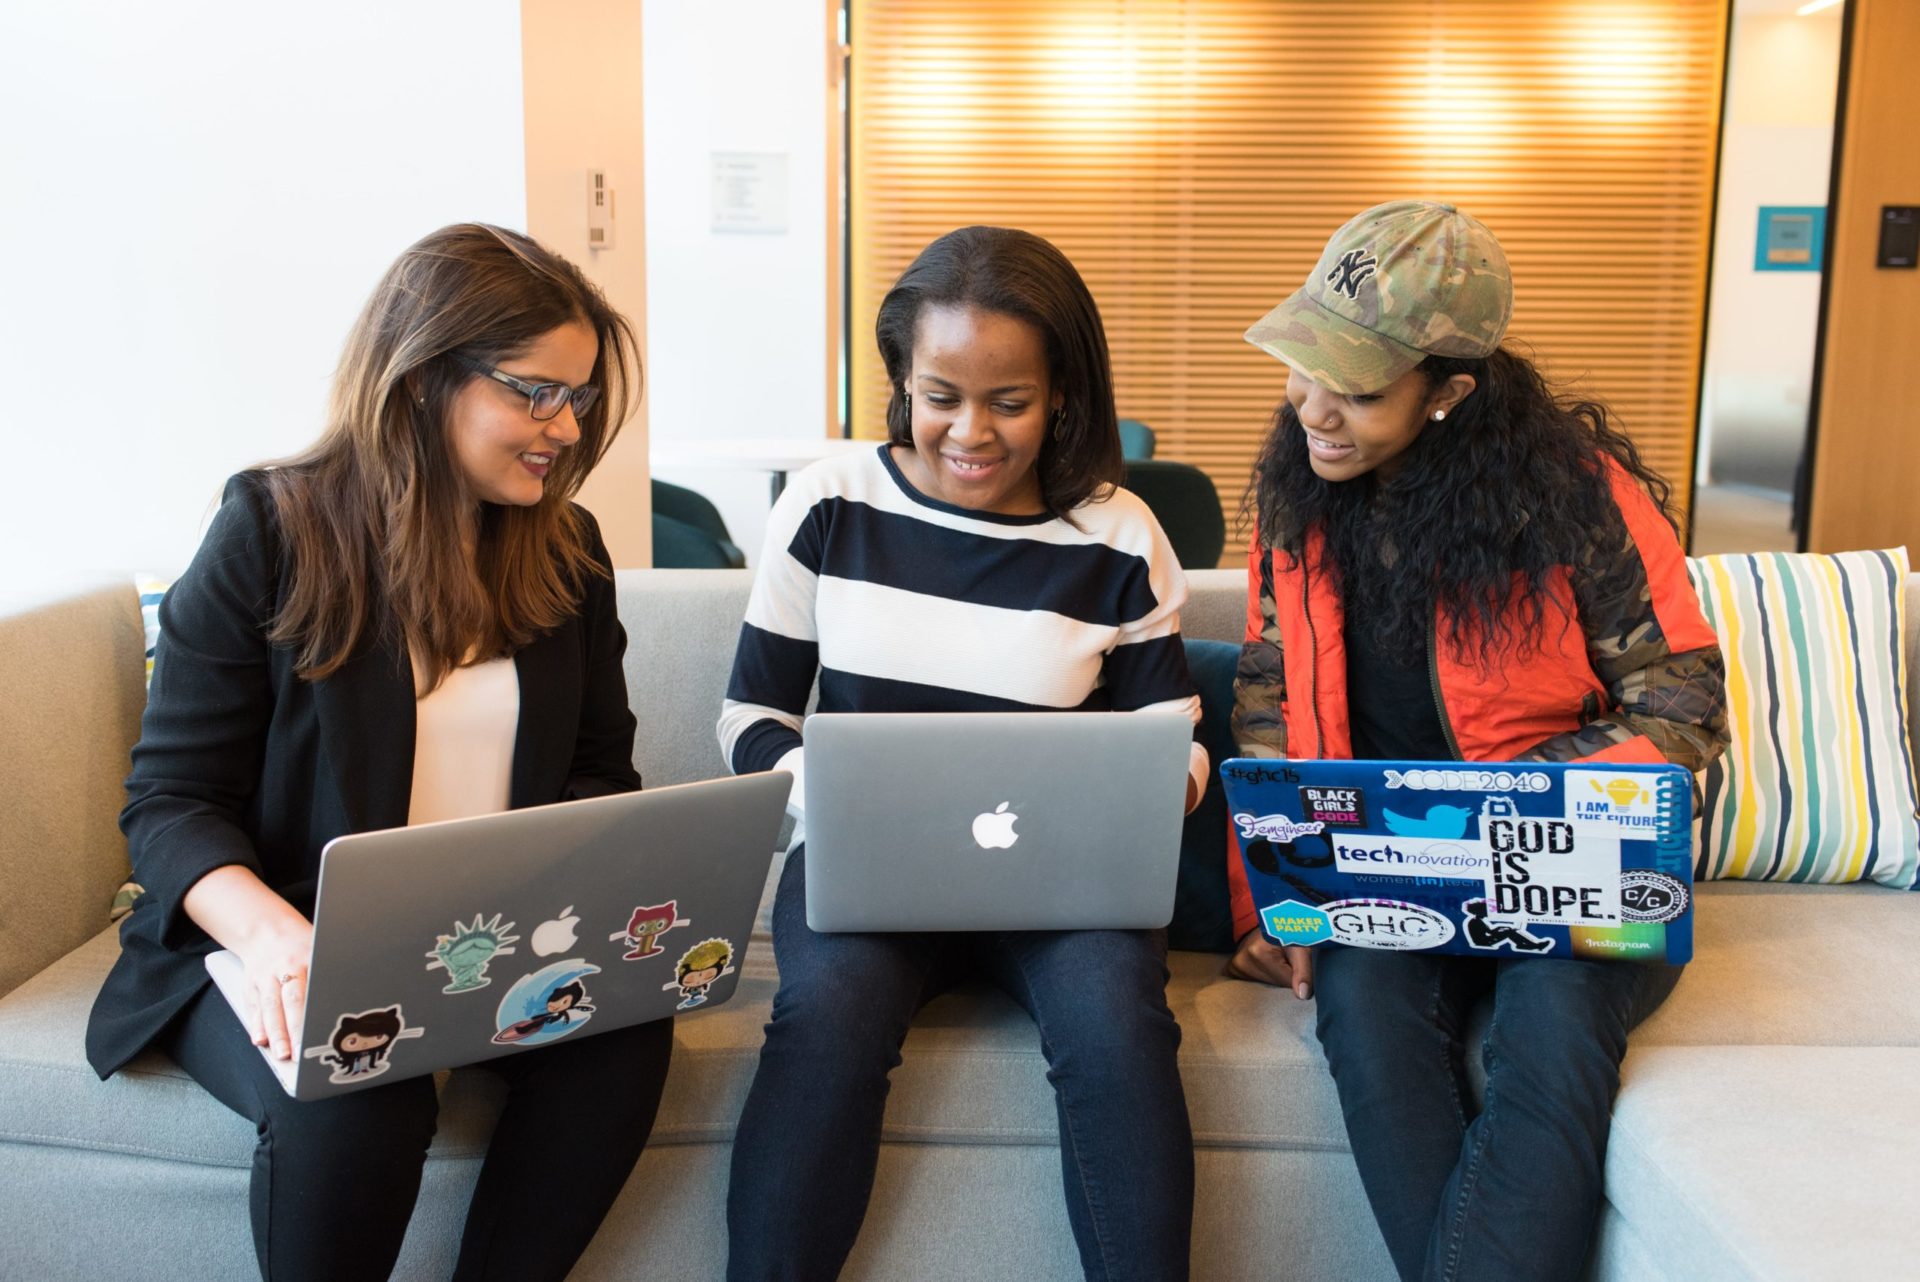 Three women sitting on a sofa with their MacBooks, which have varying numbers of techie stickers on them (Photo by Christina @ wocintechchat.com on Unsplash)